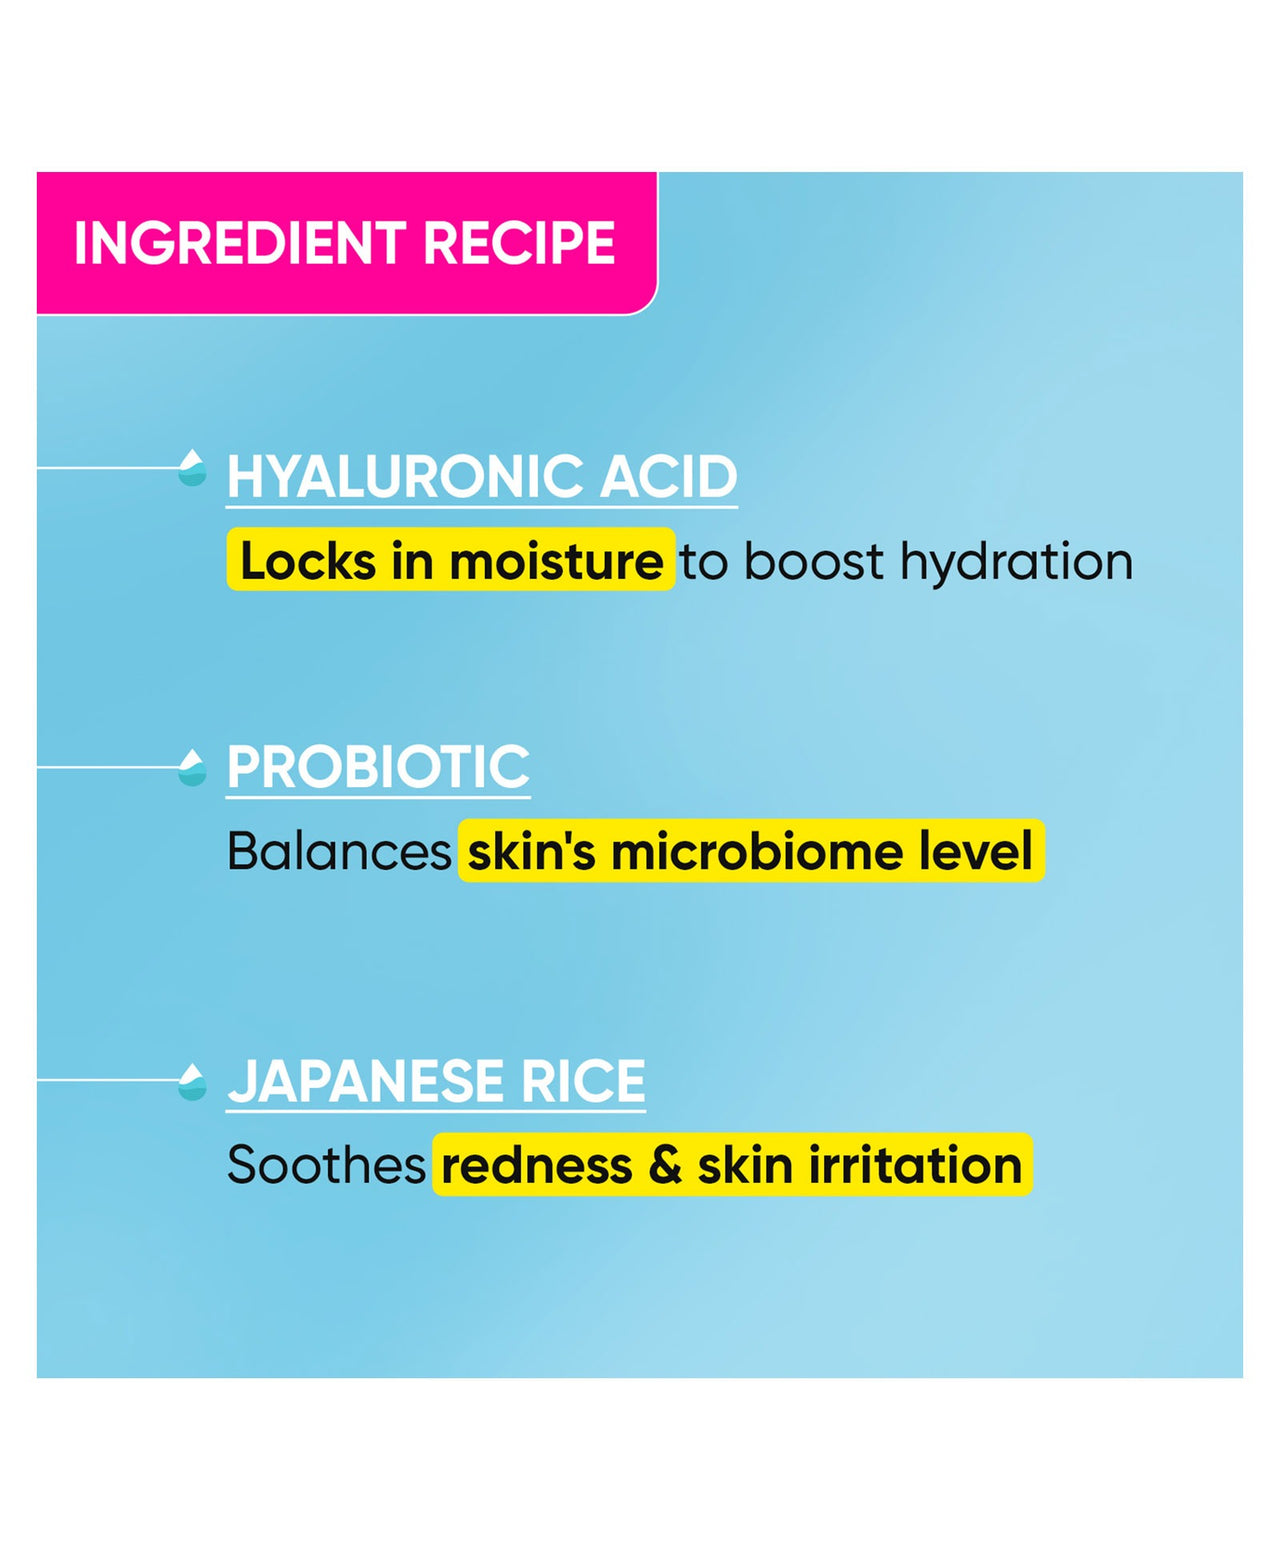 Dot & Key 72 Hr Hydrating Probiotic Face Gel With With Hyaluronic Acid, Kombucha & Rice Water - Distacart